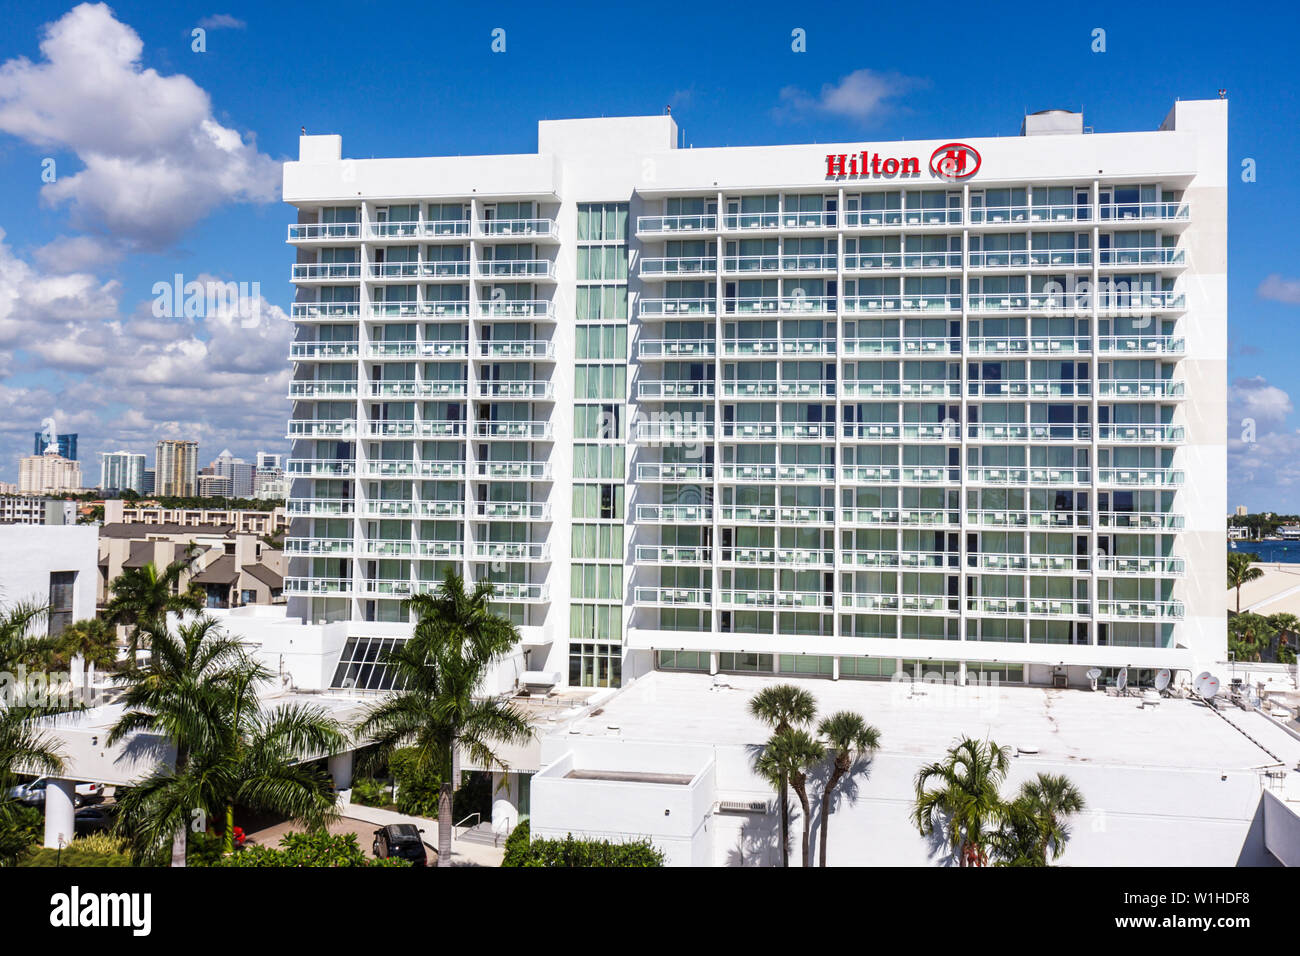 Fort Ft. Lauderdale Florida,Hilton Fort Lauderdale Marina,hotel,hotels,chain,hospitality,lodging,building,high rise skyscraper skyscrapers building bu Stock Photo